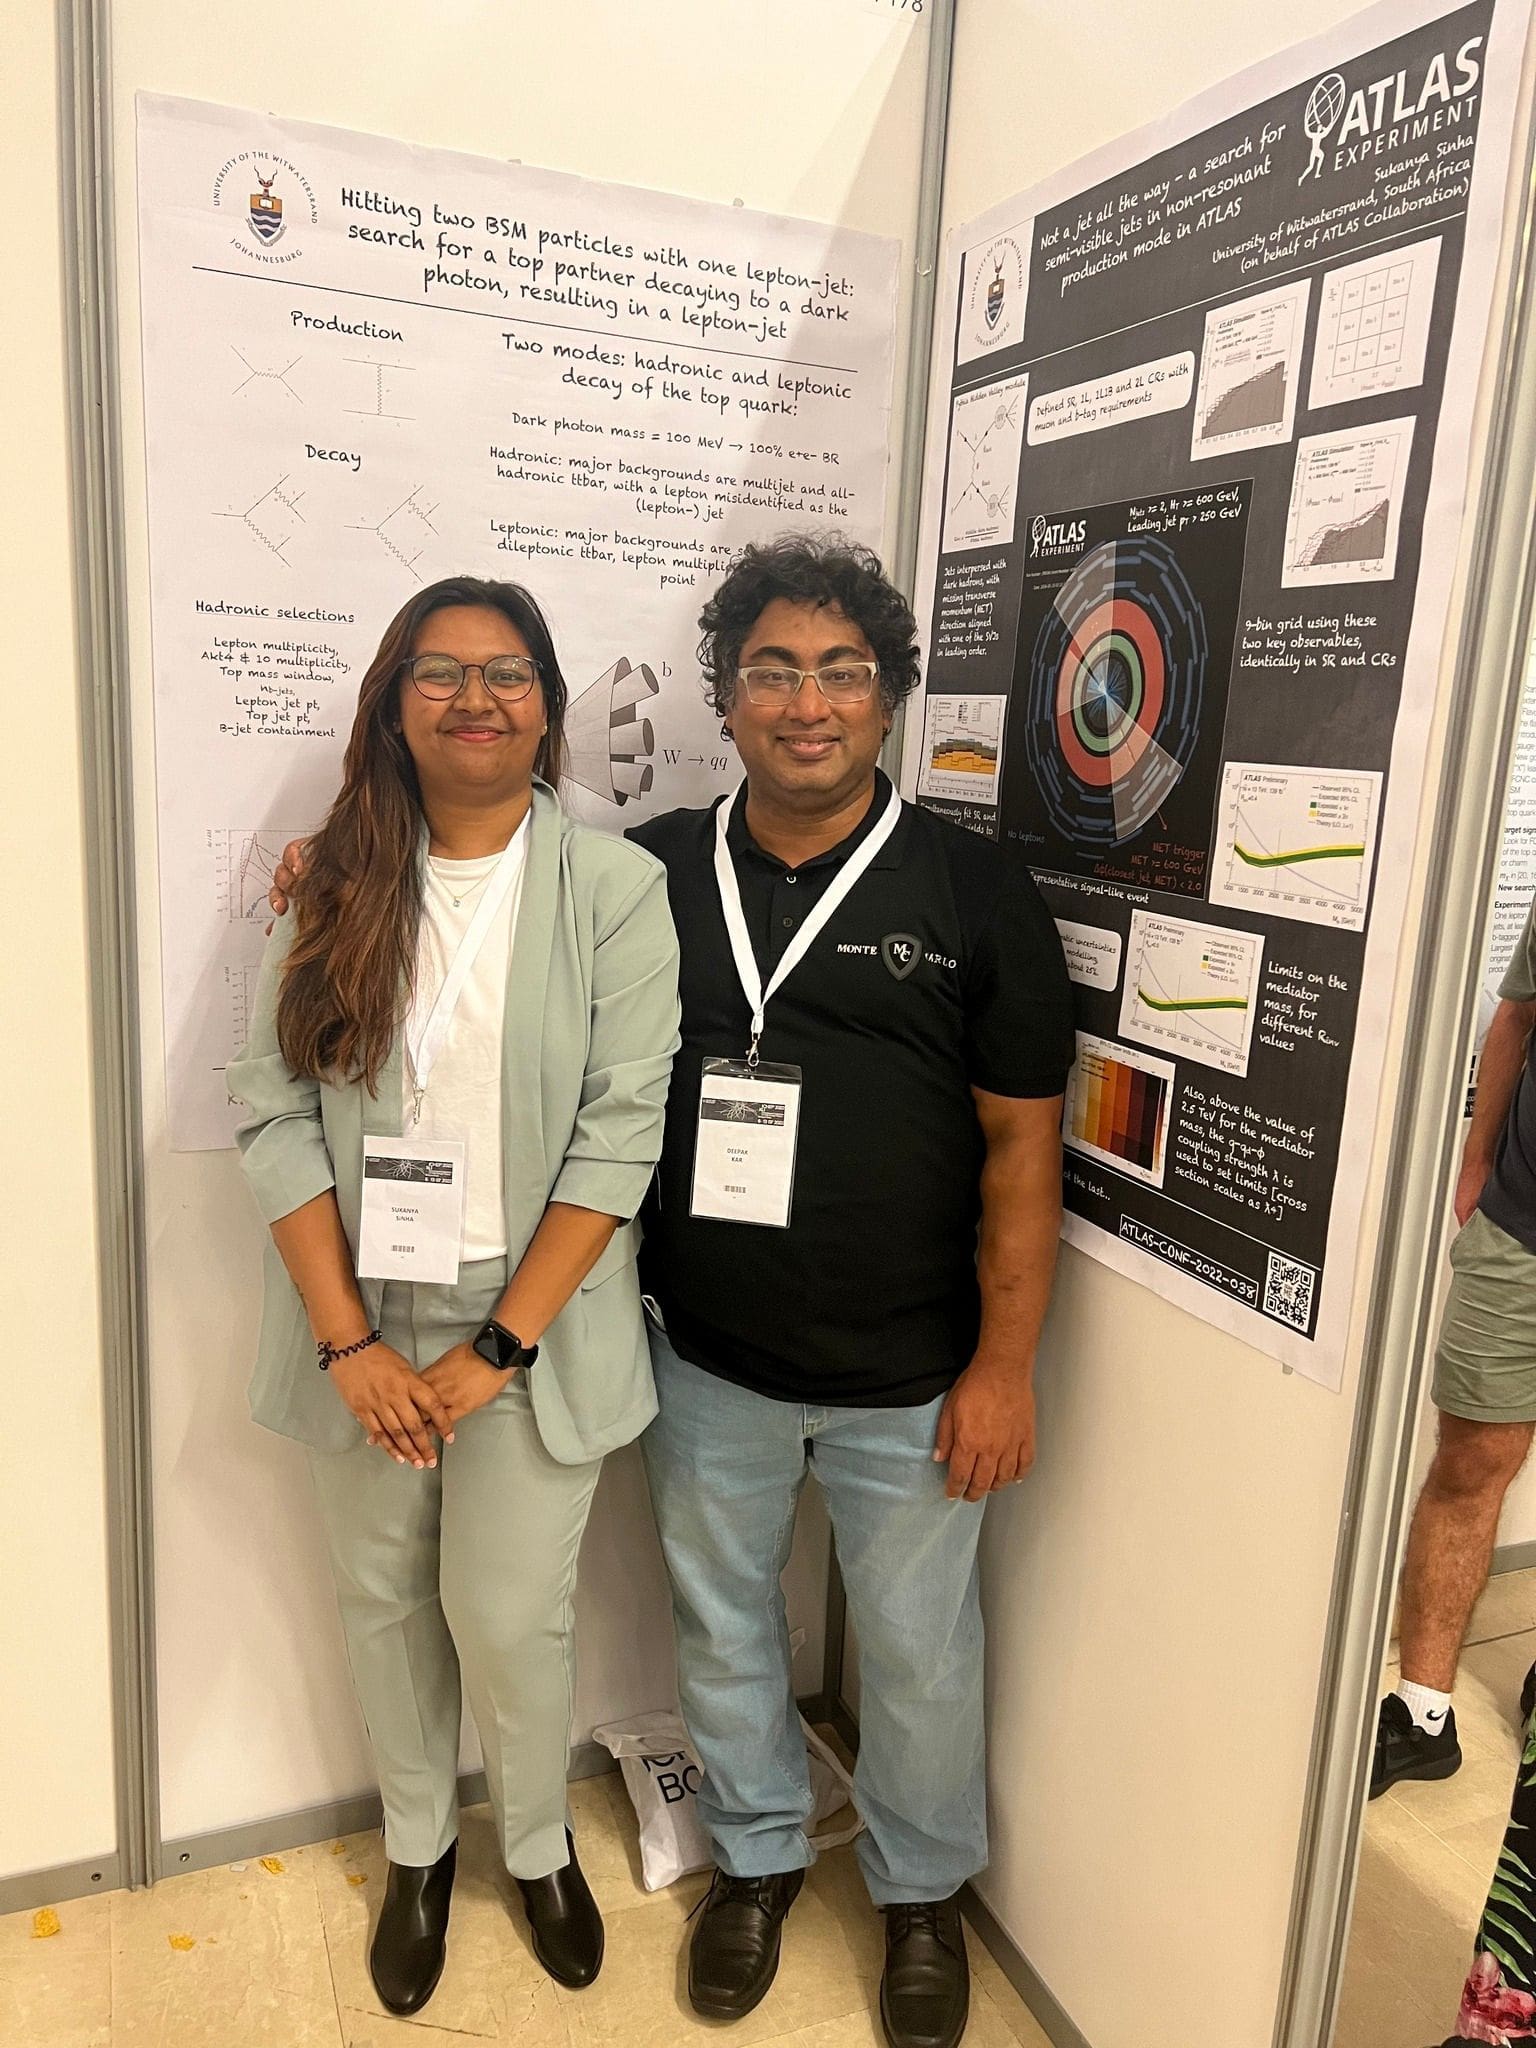 Working at the ATLAS experiment at CERN, Kar and his former PhD student, Sukanya Sinha (now a postdoctoral researcher at the University of Manchester), has pioneered a new way of searching for Dark Matter.